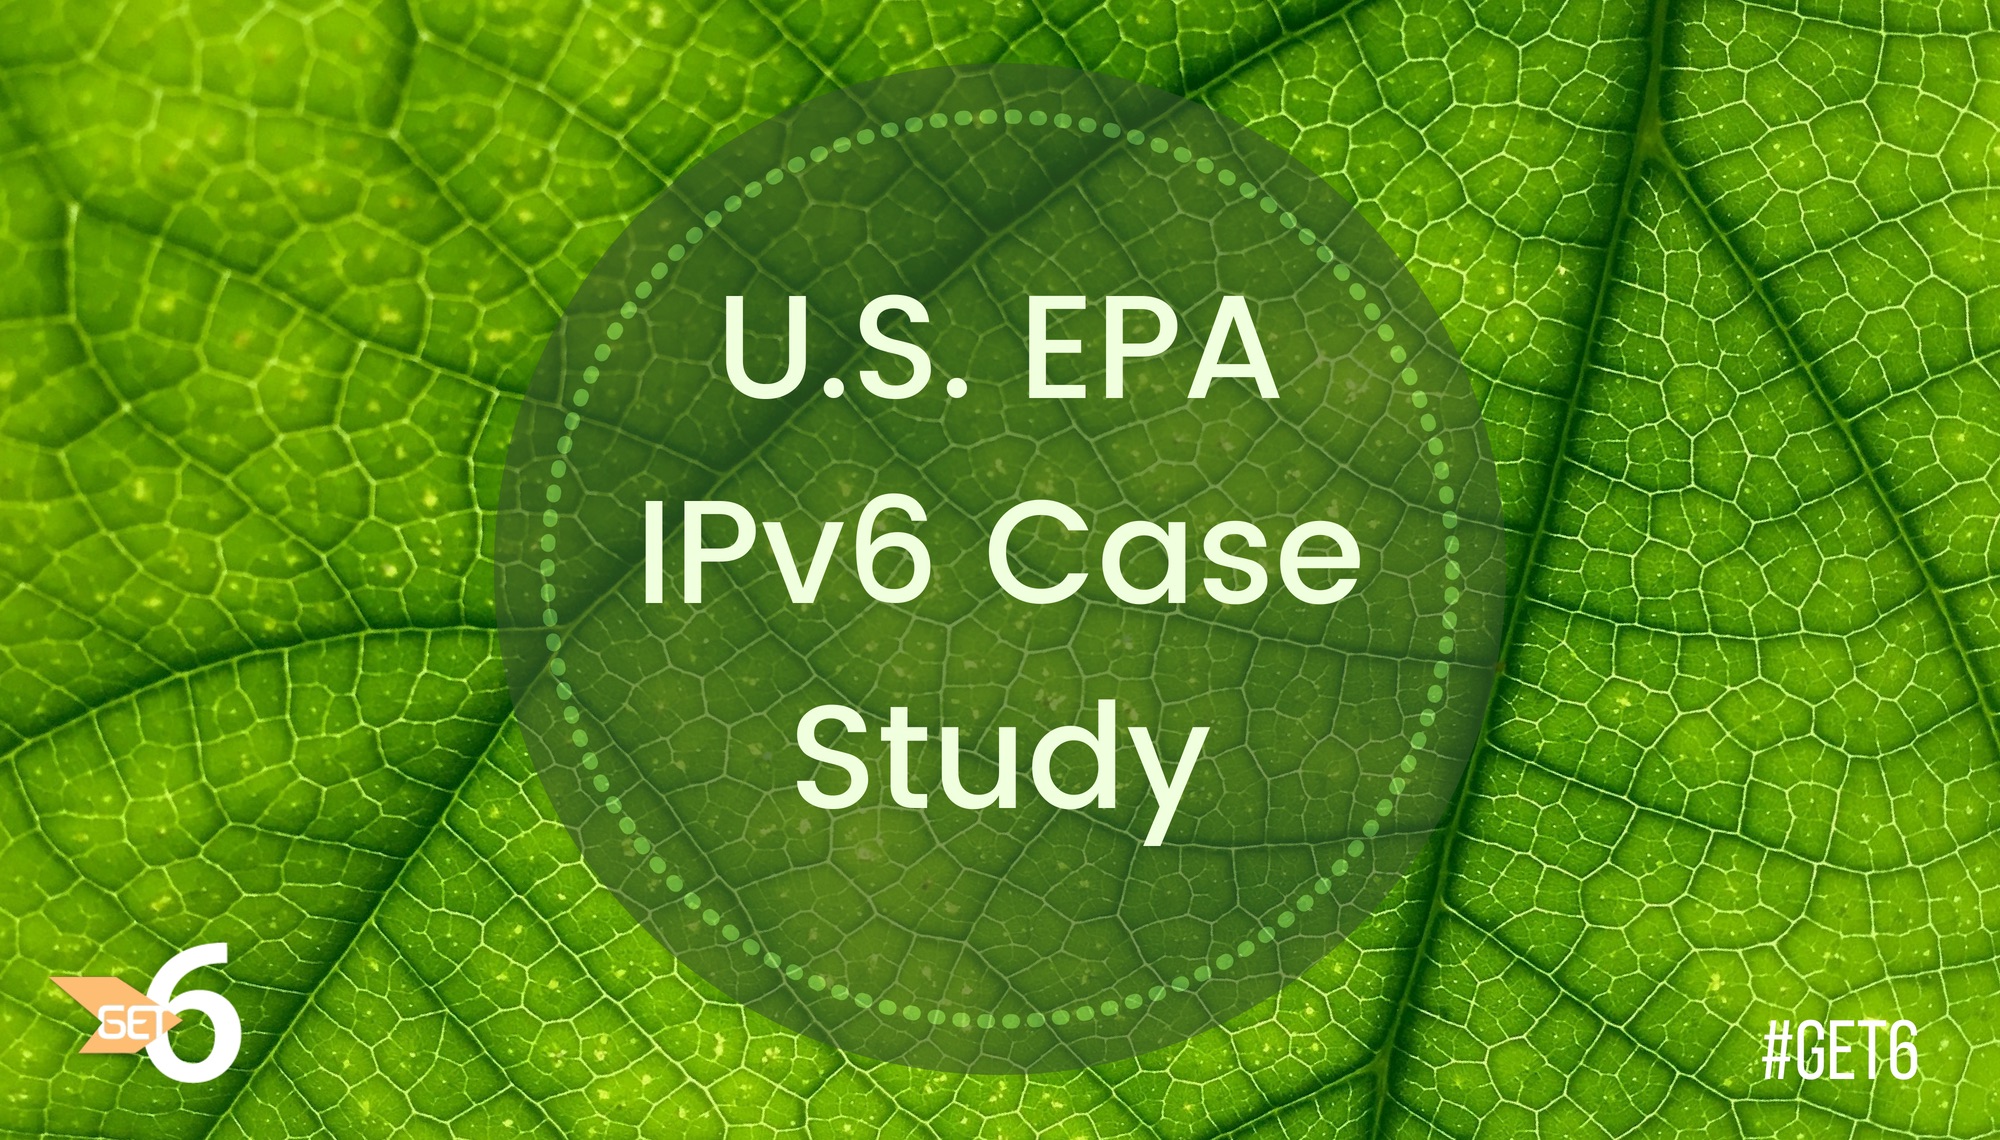 EPA Committed to Finding a Workaround for Every IPv6 Challenge